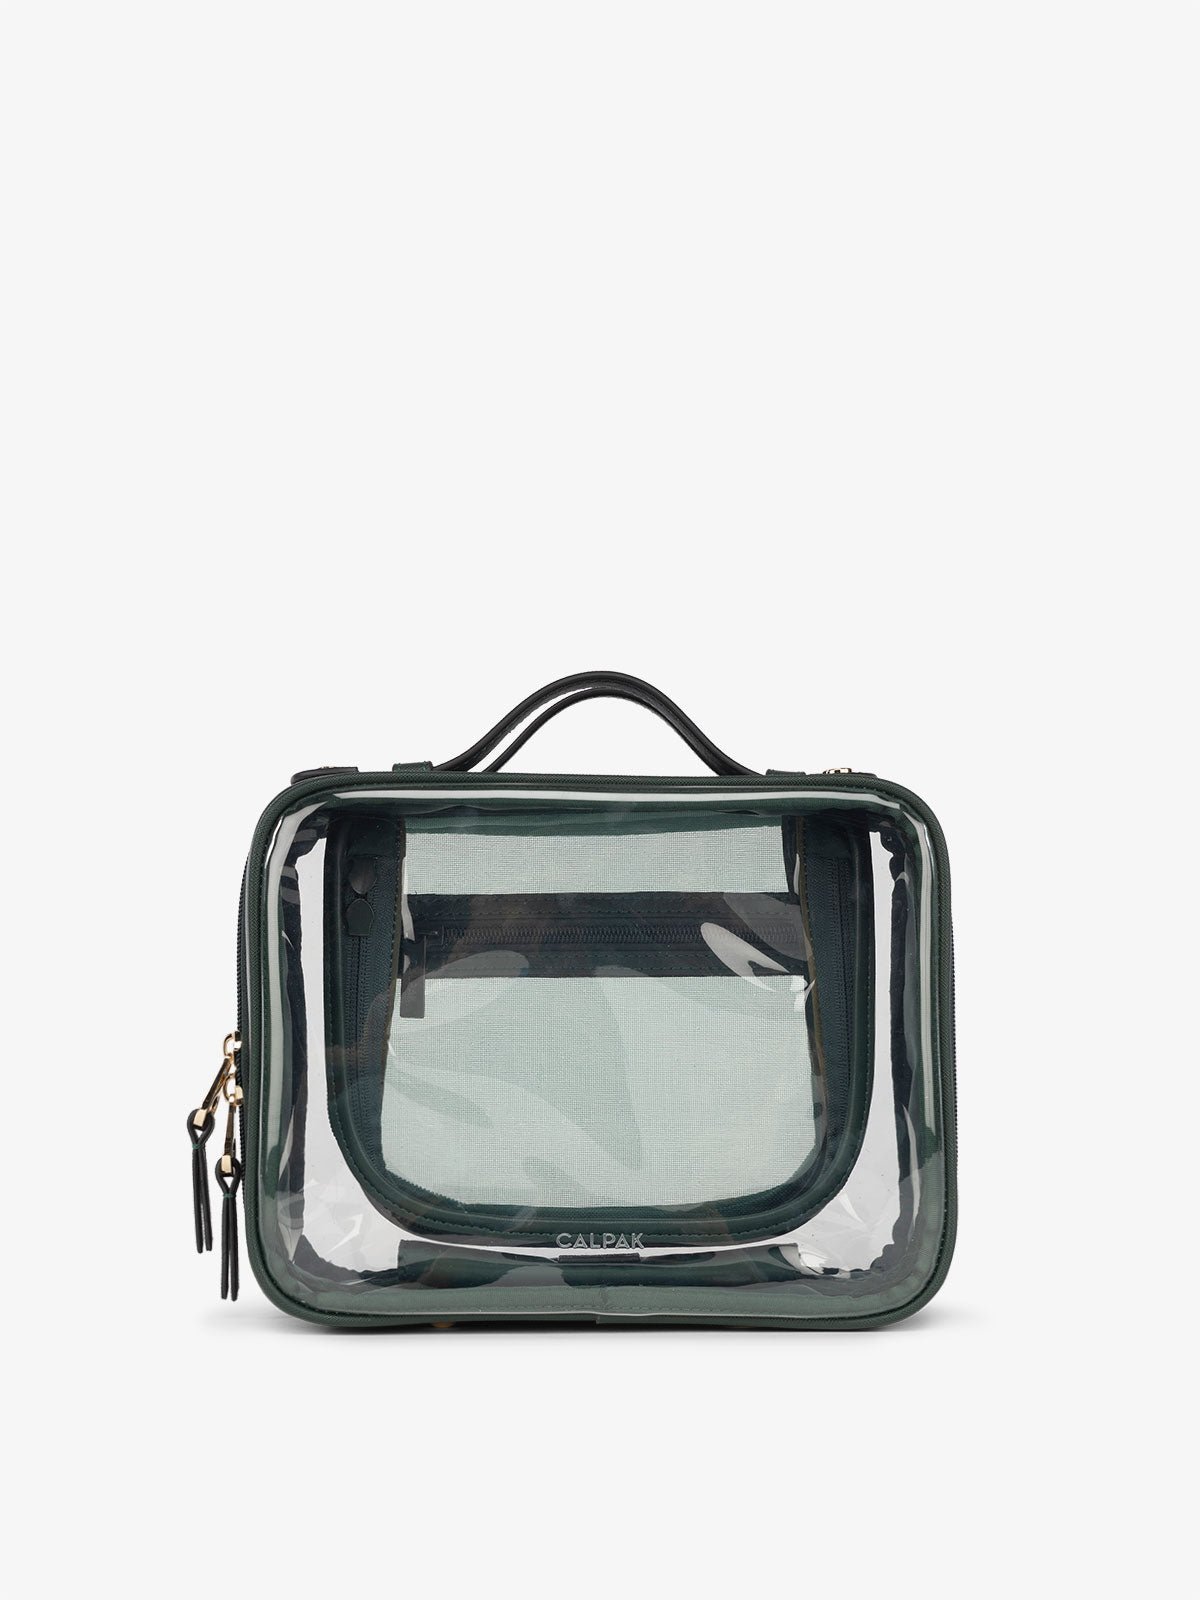 CALPAK Medium clear makeup bag with compartments in green